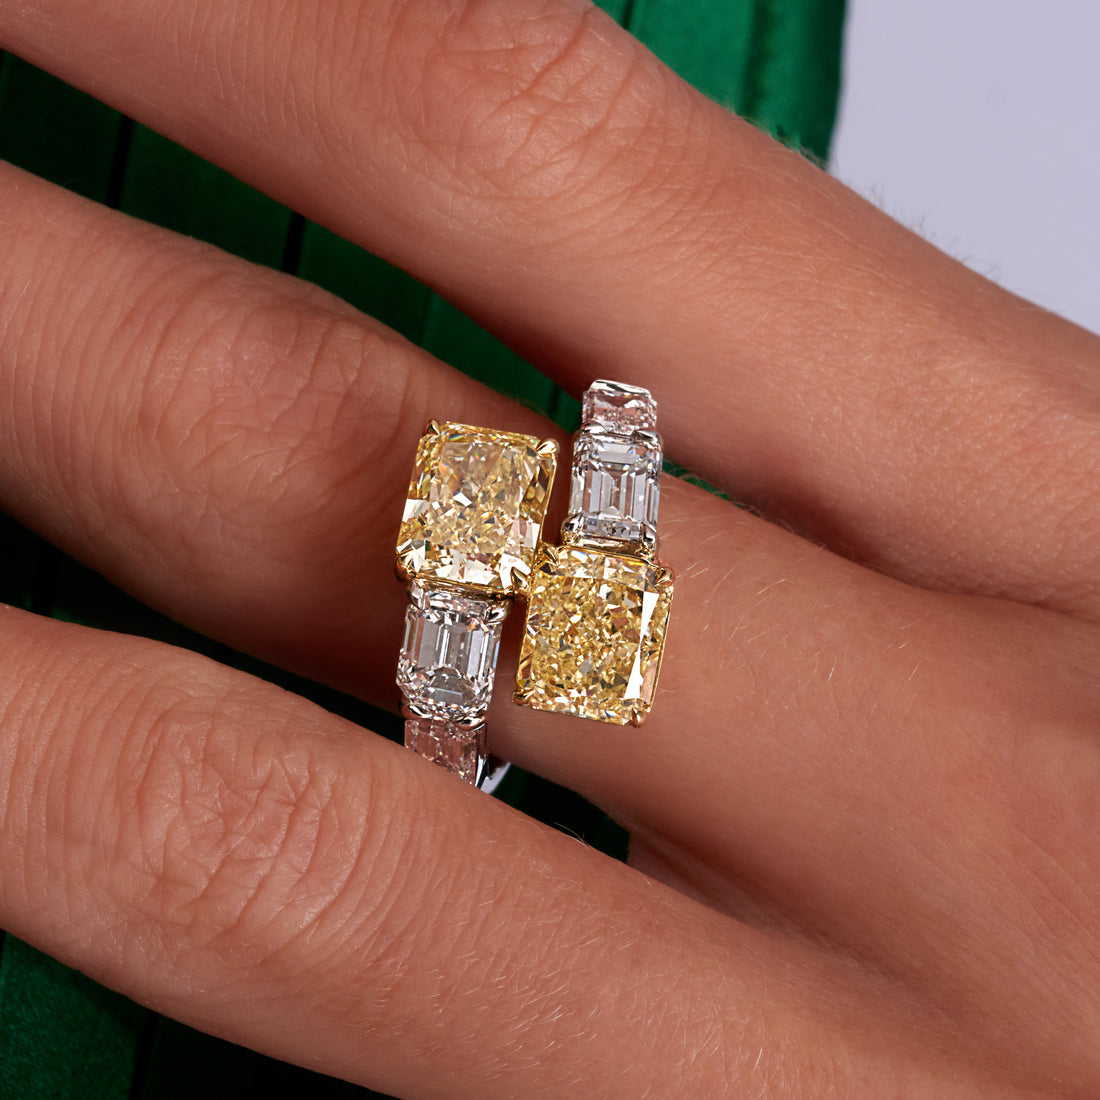 6.51 CT. Radiant Cut YZ Yellow Diamond and Emerald Cut Diamond Bypass Ring in Platinum and 18K Yellow Gold